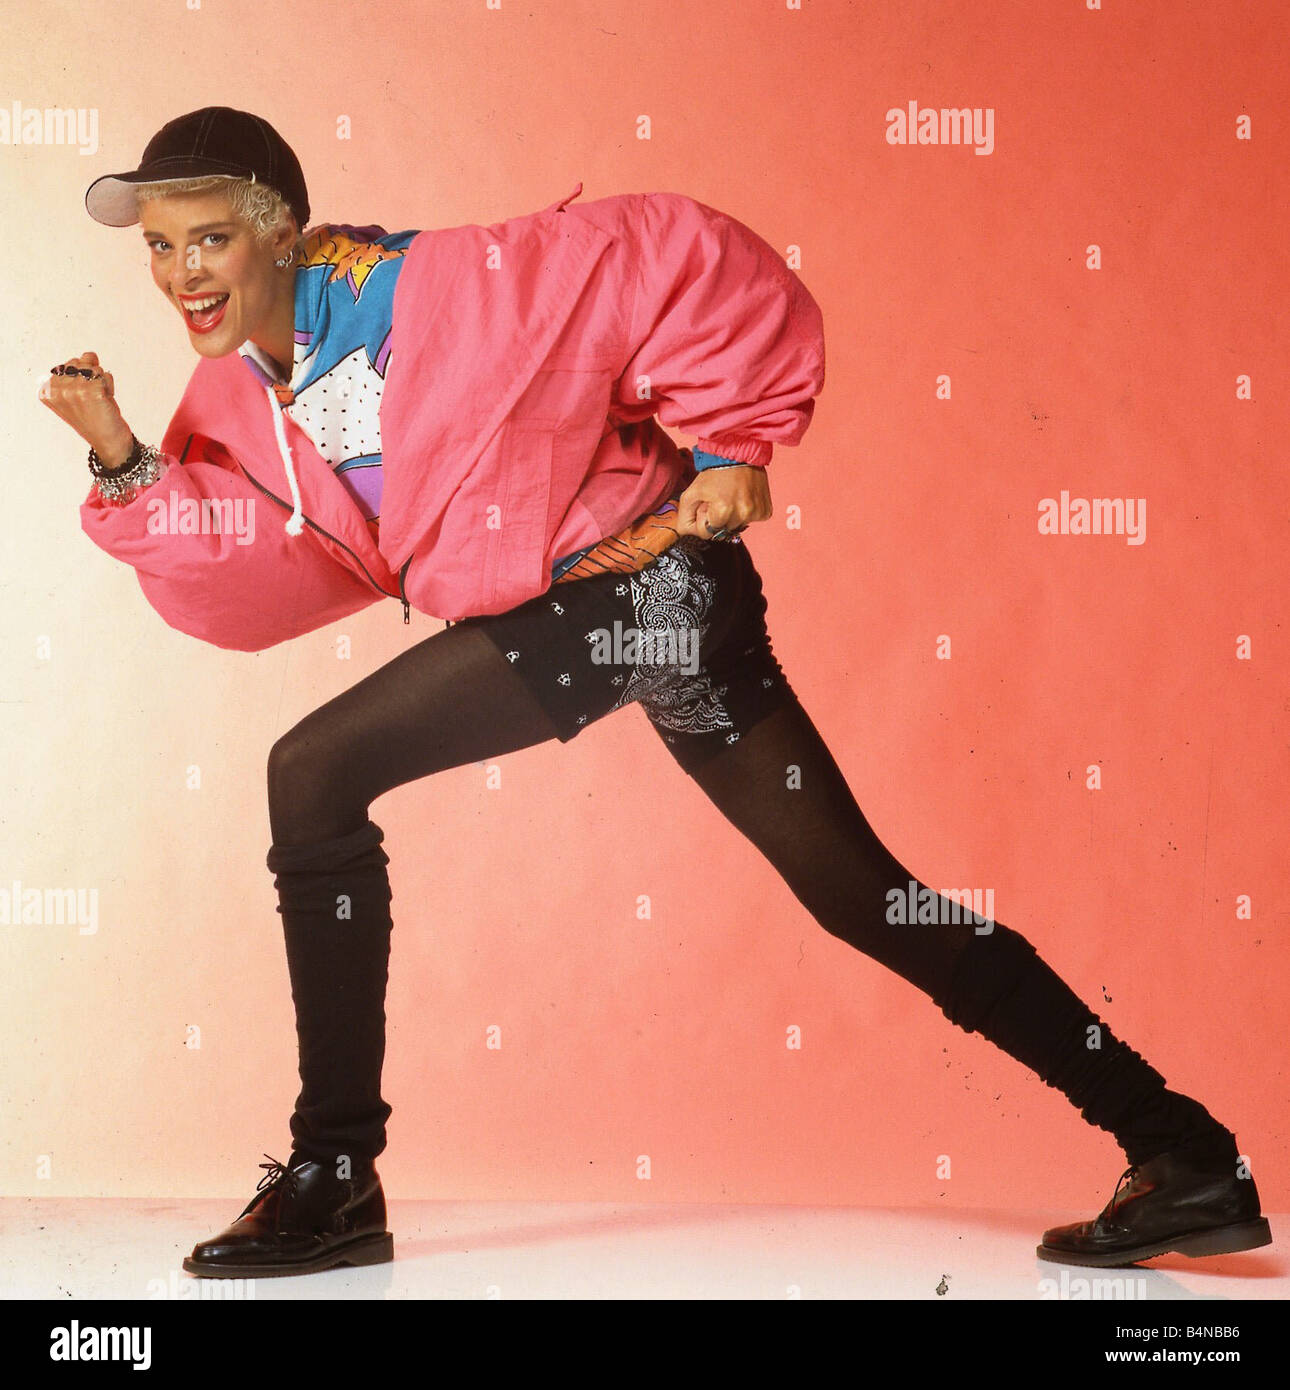 Yazz pictures of Bryshere Y.